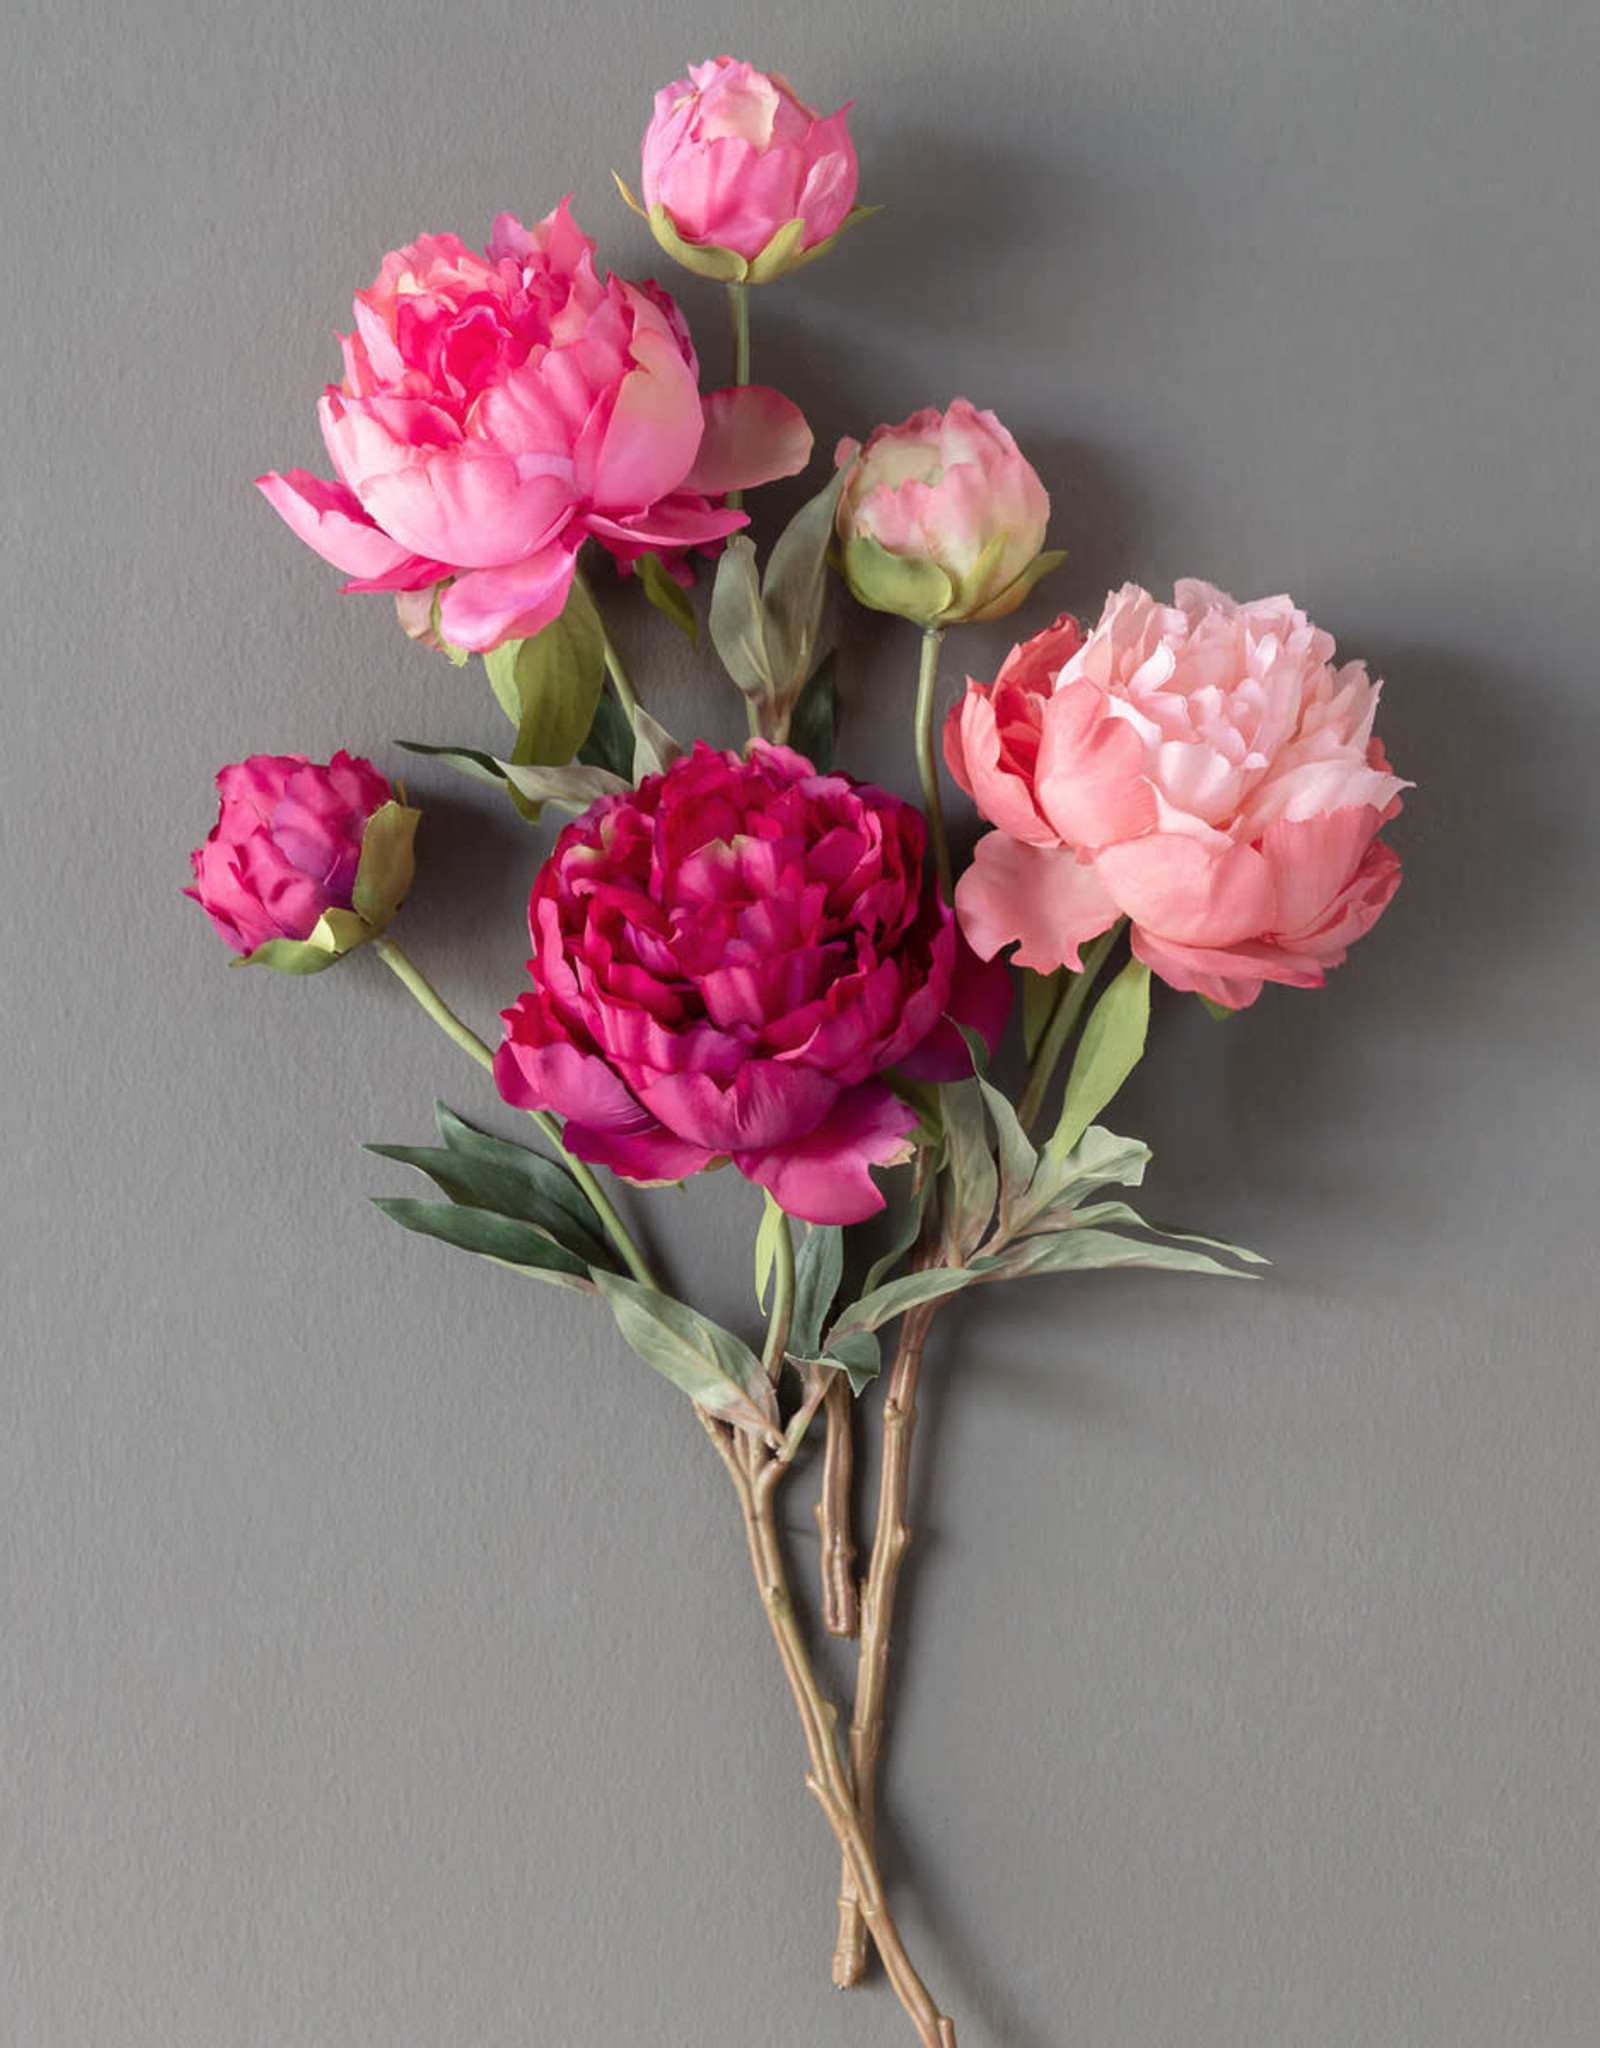 Park Hill Collection Summer Peony, Pink Cerise Mix, 3 Assorted Colors